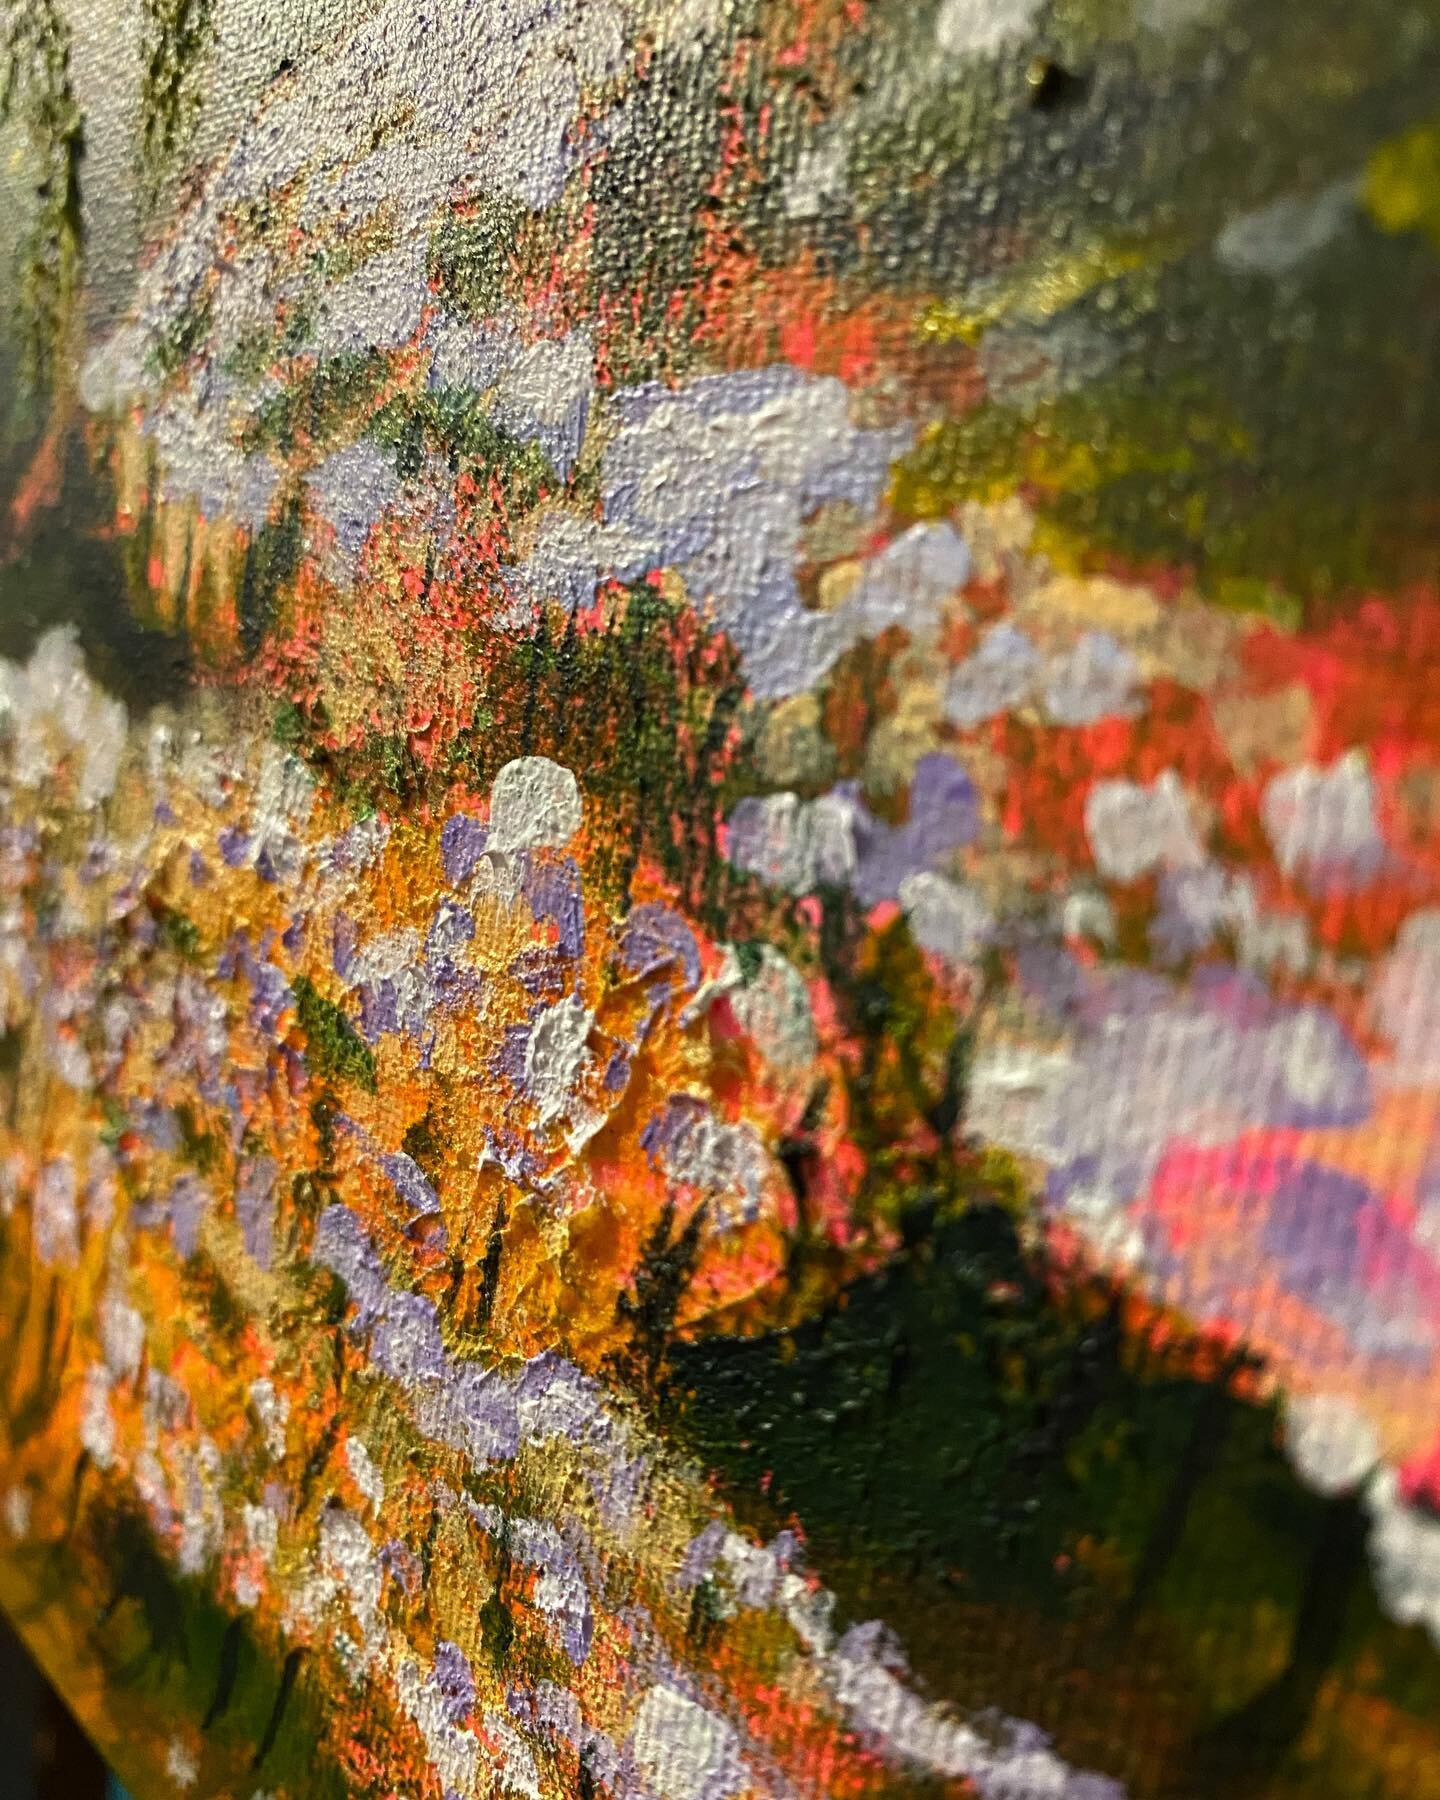 Juicy texture on a new painting I&rsquo;m working on! I&rsquo;m loving the bright colours! Can&rsquo;t wait to show the finished piece 🥳💐

#painting #acrylicpainting #acrylic #holbein #holbeinacrylic #landscape #landscapepainting #canadianlandscape